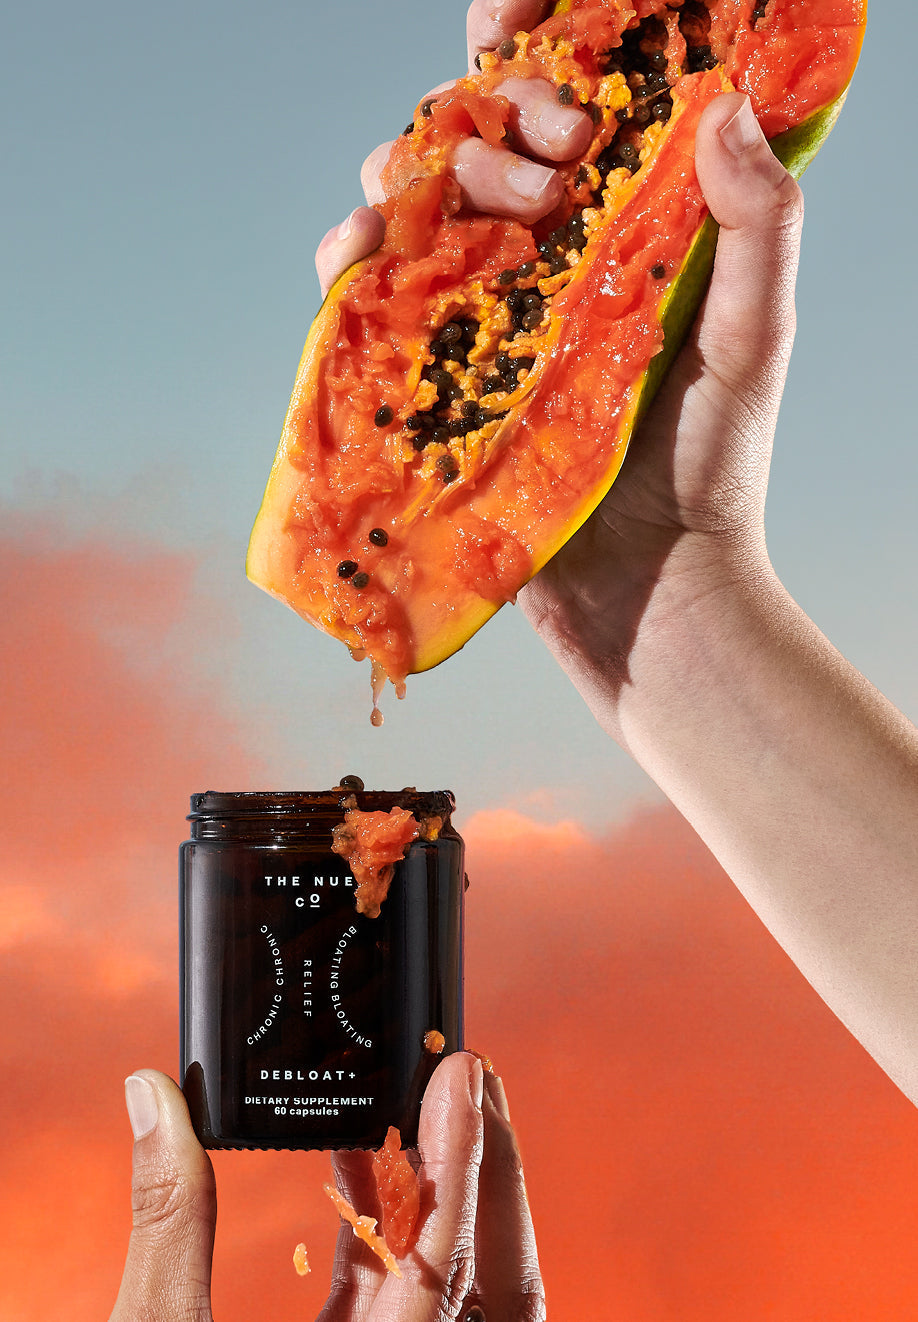 Papaya Pulp being squeezed into a bottle of DEBLOAT+ Capsules